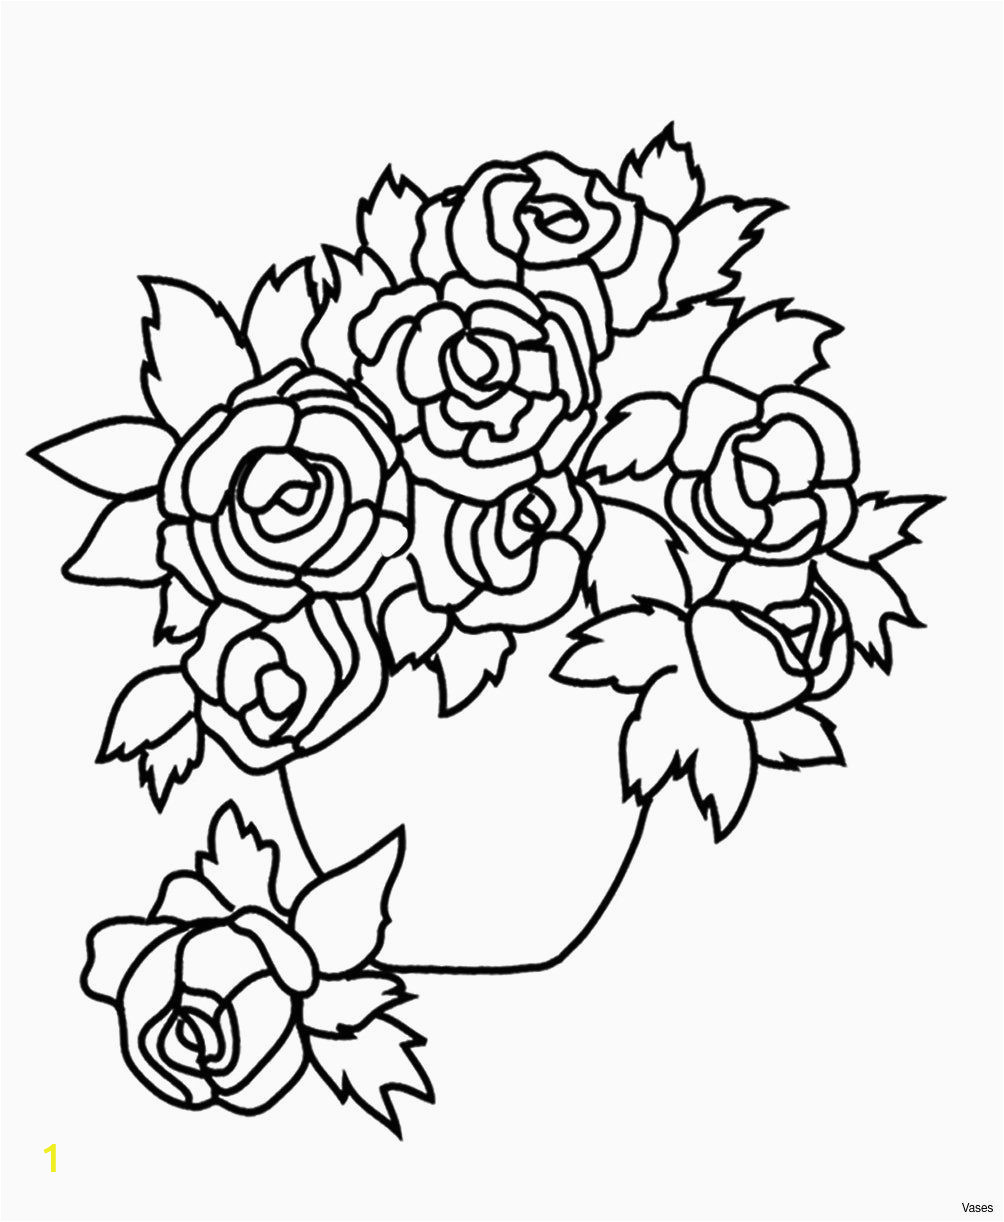 Free Coloring Pages Of Tulips Coloring for Children Best Color Page New